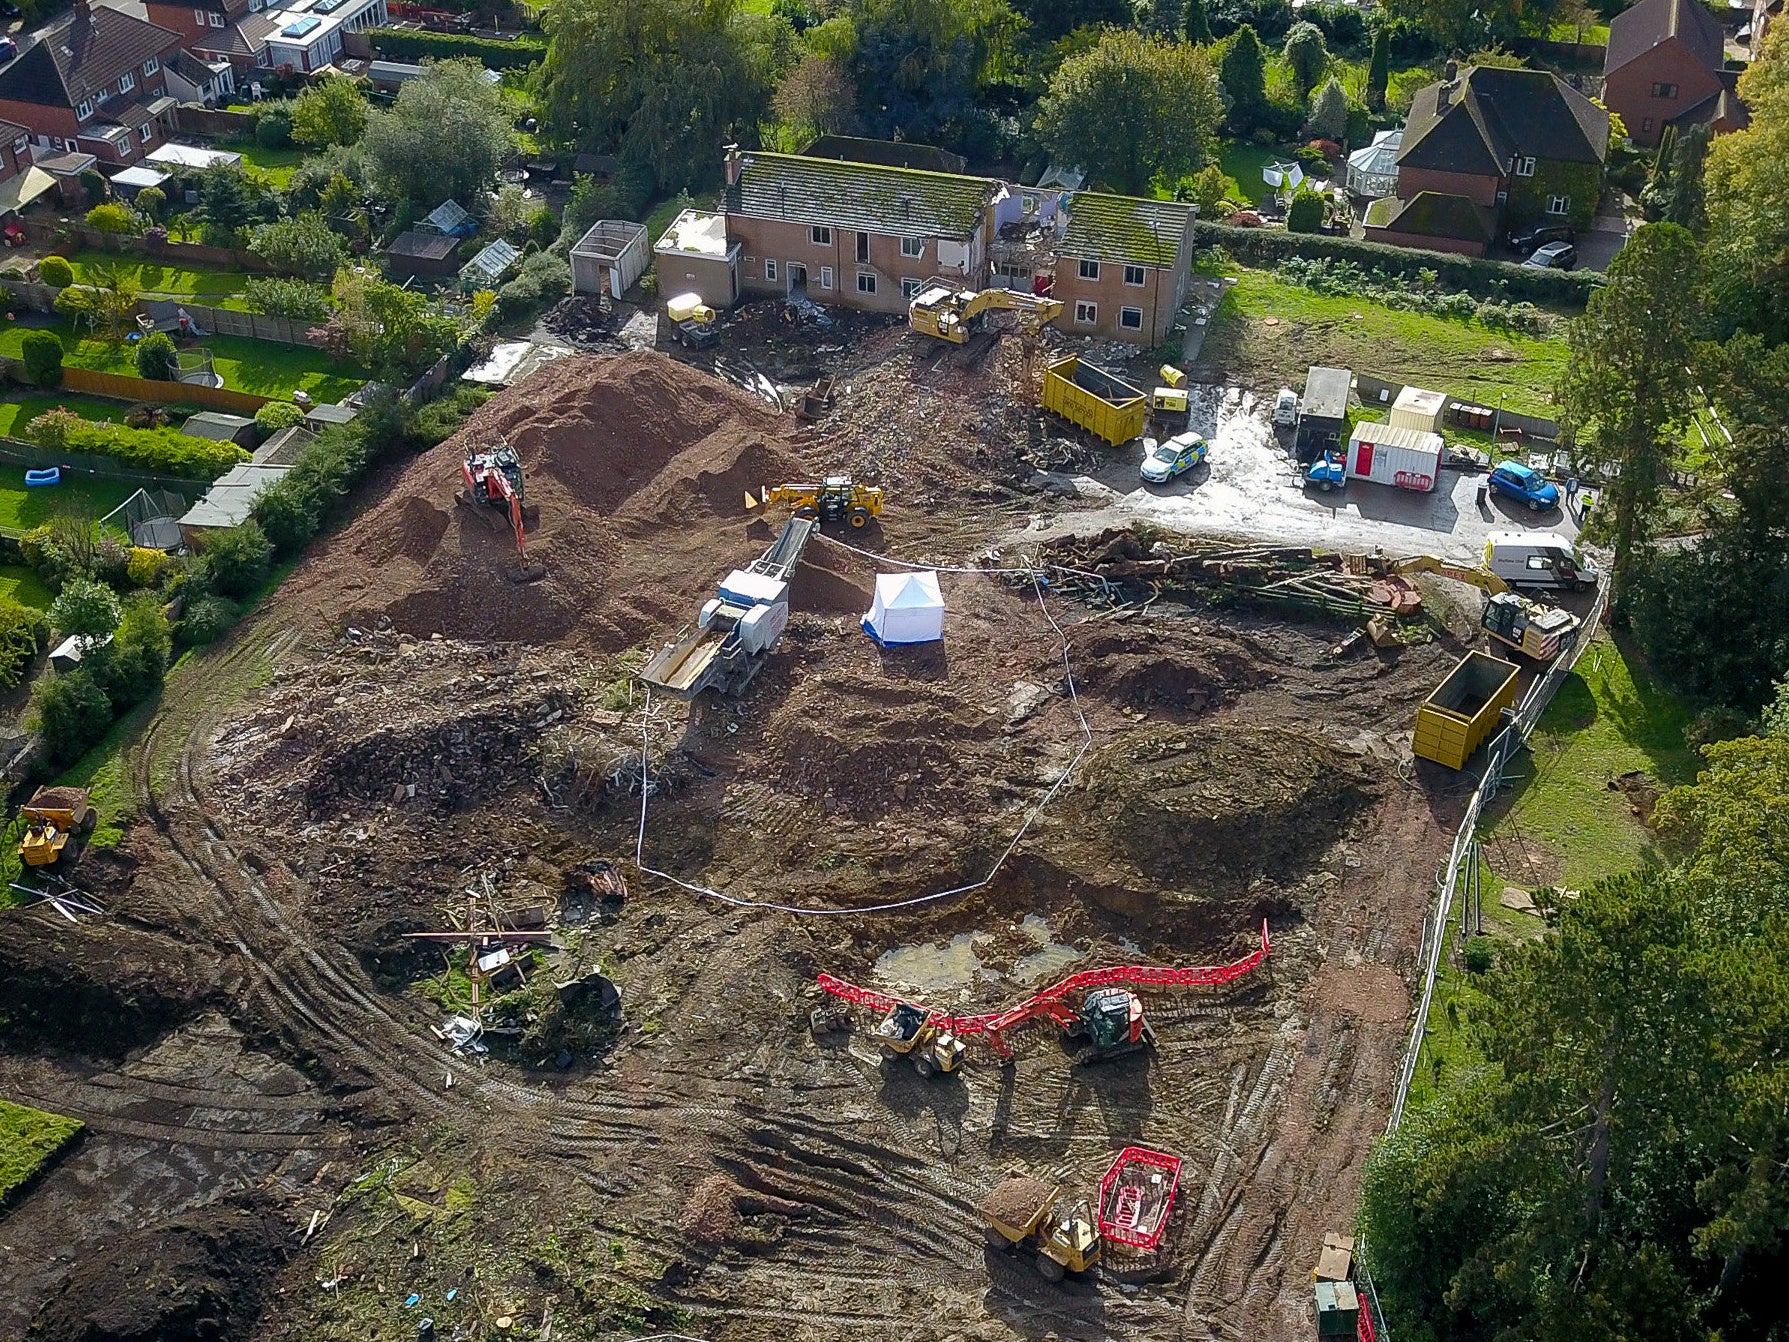 Aerial view of police forensic tent on a building site in Melton Mowbray, Leicestershire, where human bones were found in October 2019 which were later dated to 635-685AD.